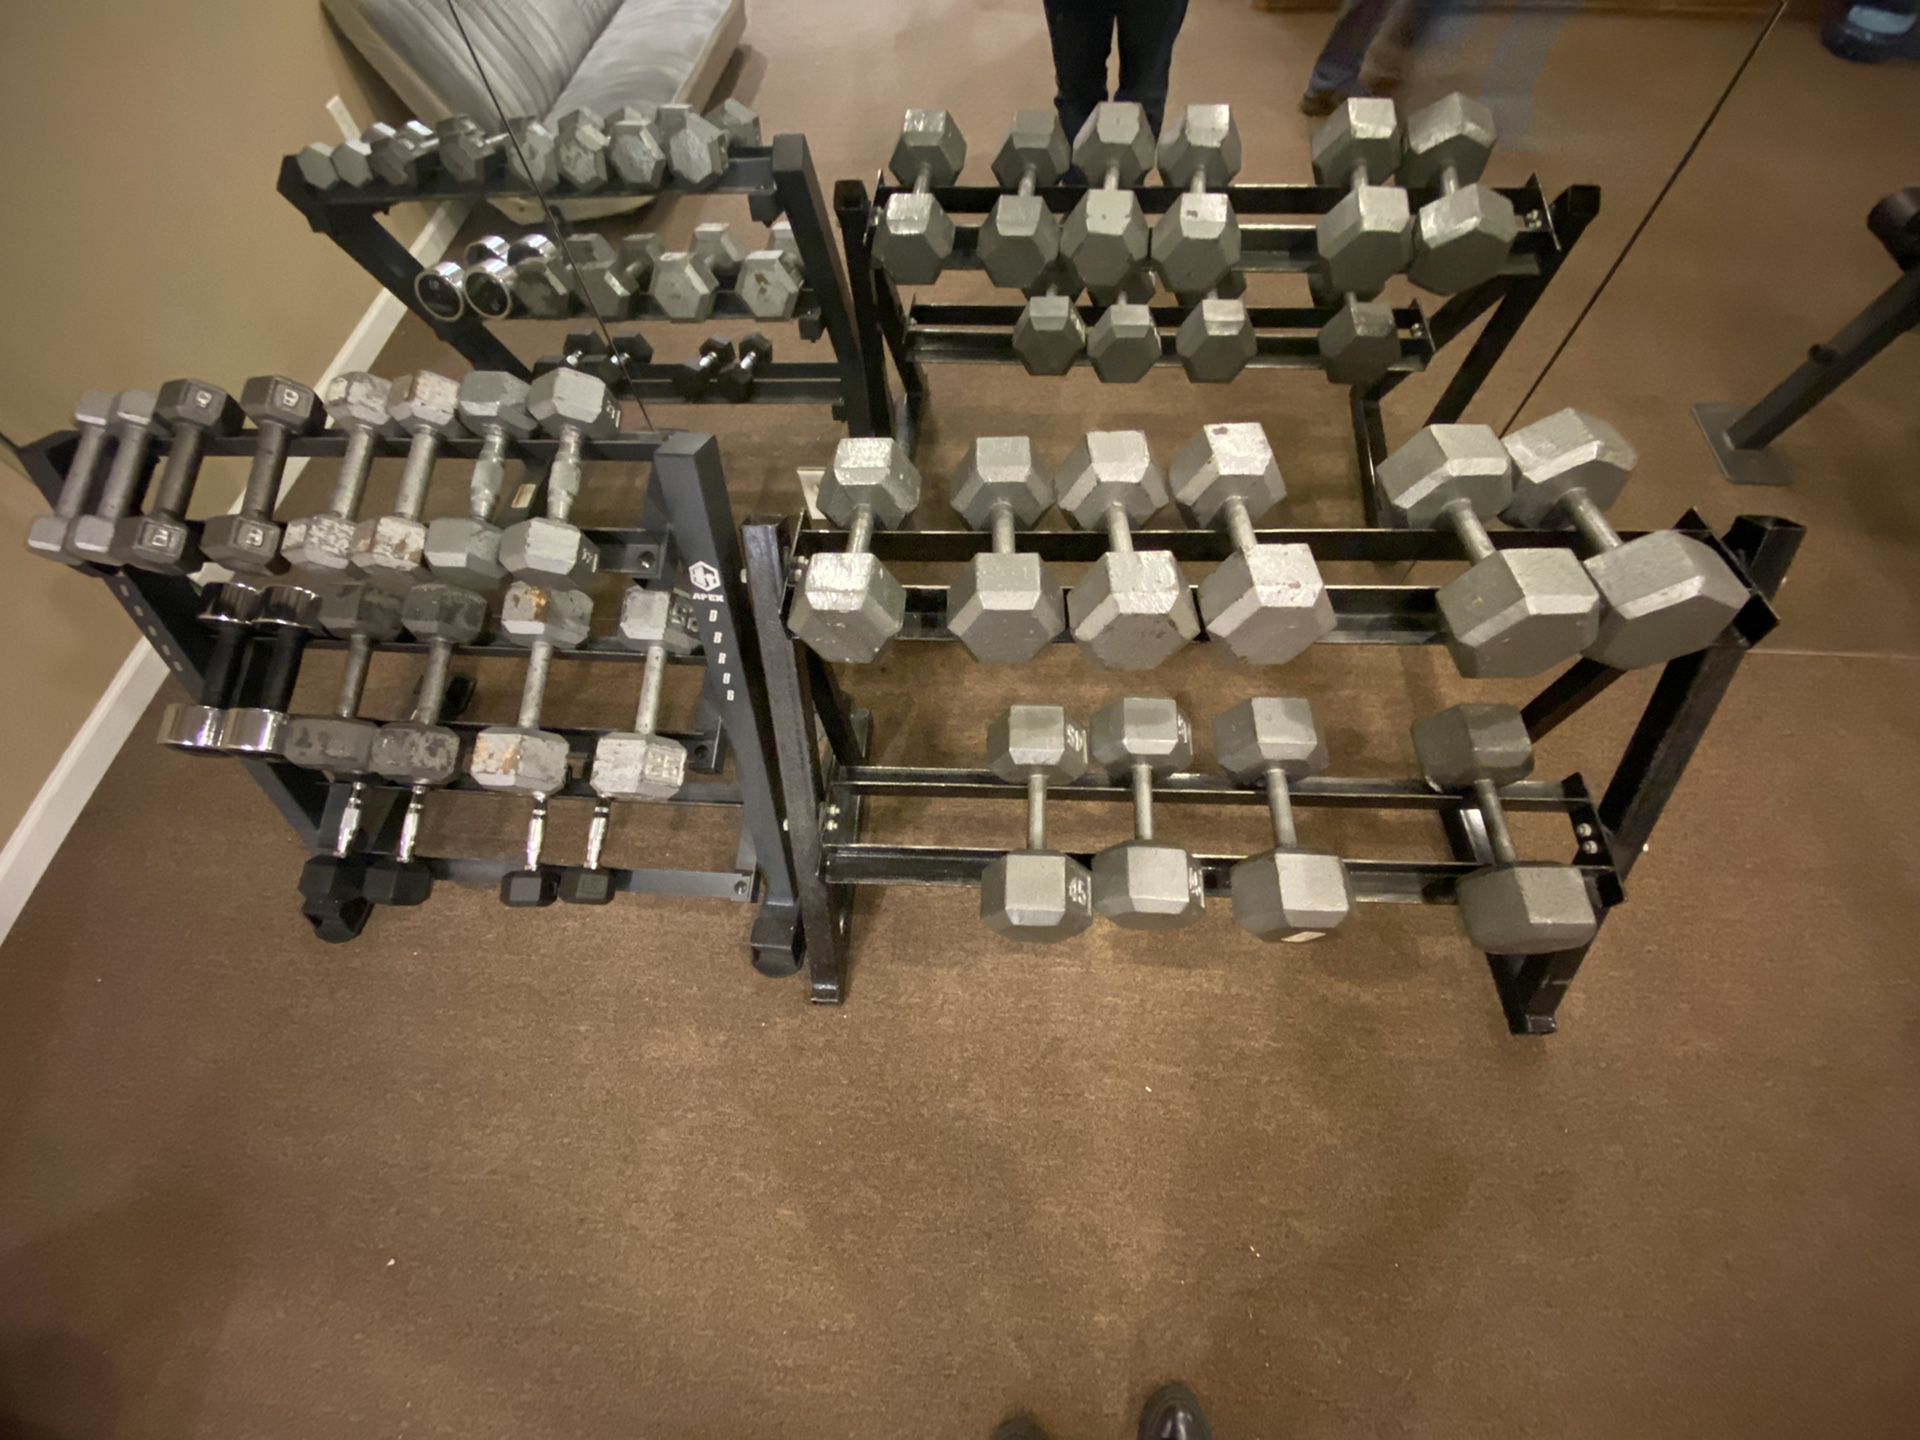 Free weights and dumbbells